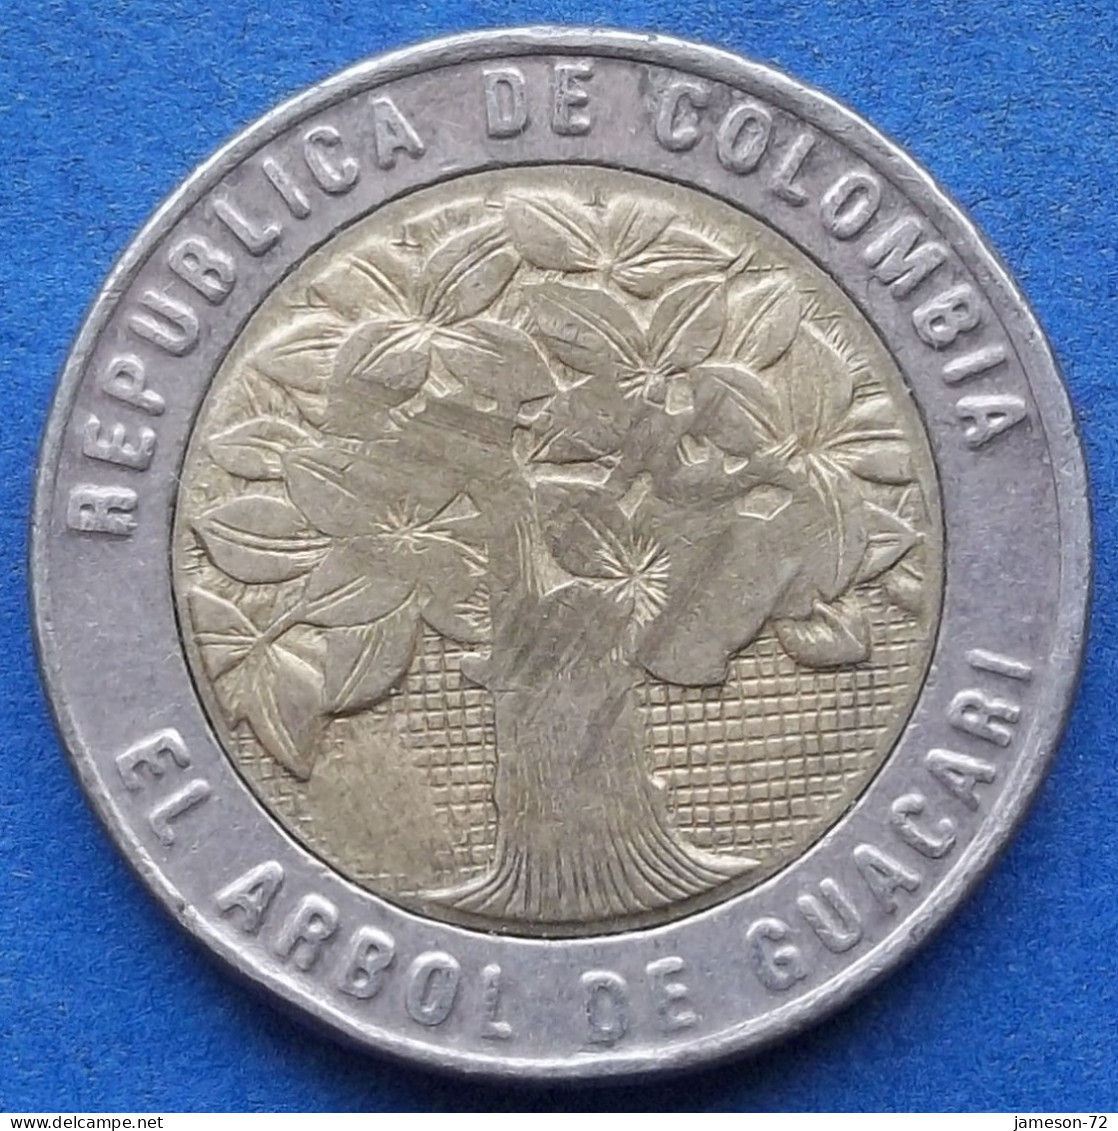 COLOMBIA - 500 Pesos 2008 "Guacari Tree" KM# 286 Republic - Edelweiss Coins - Colombia